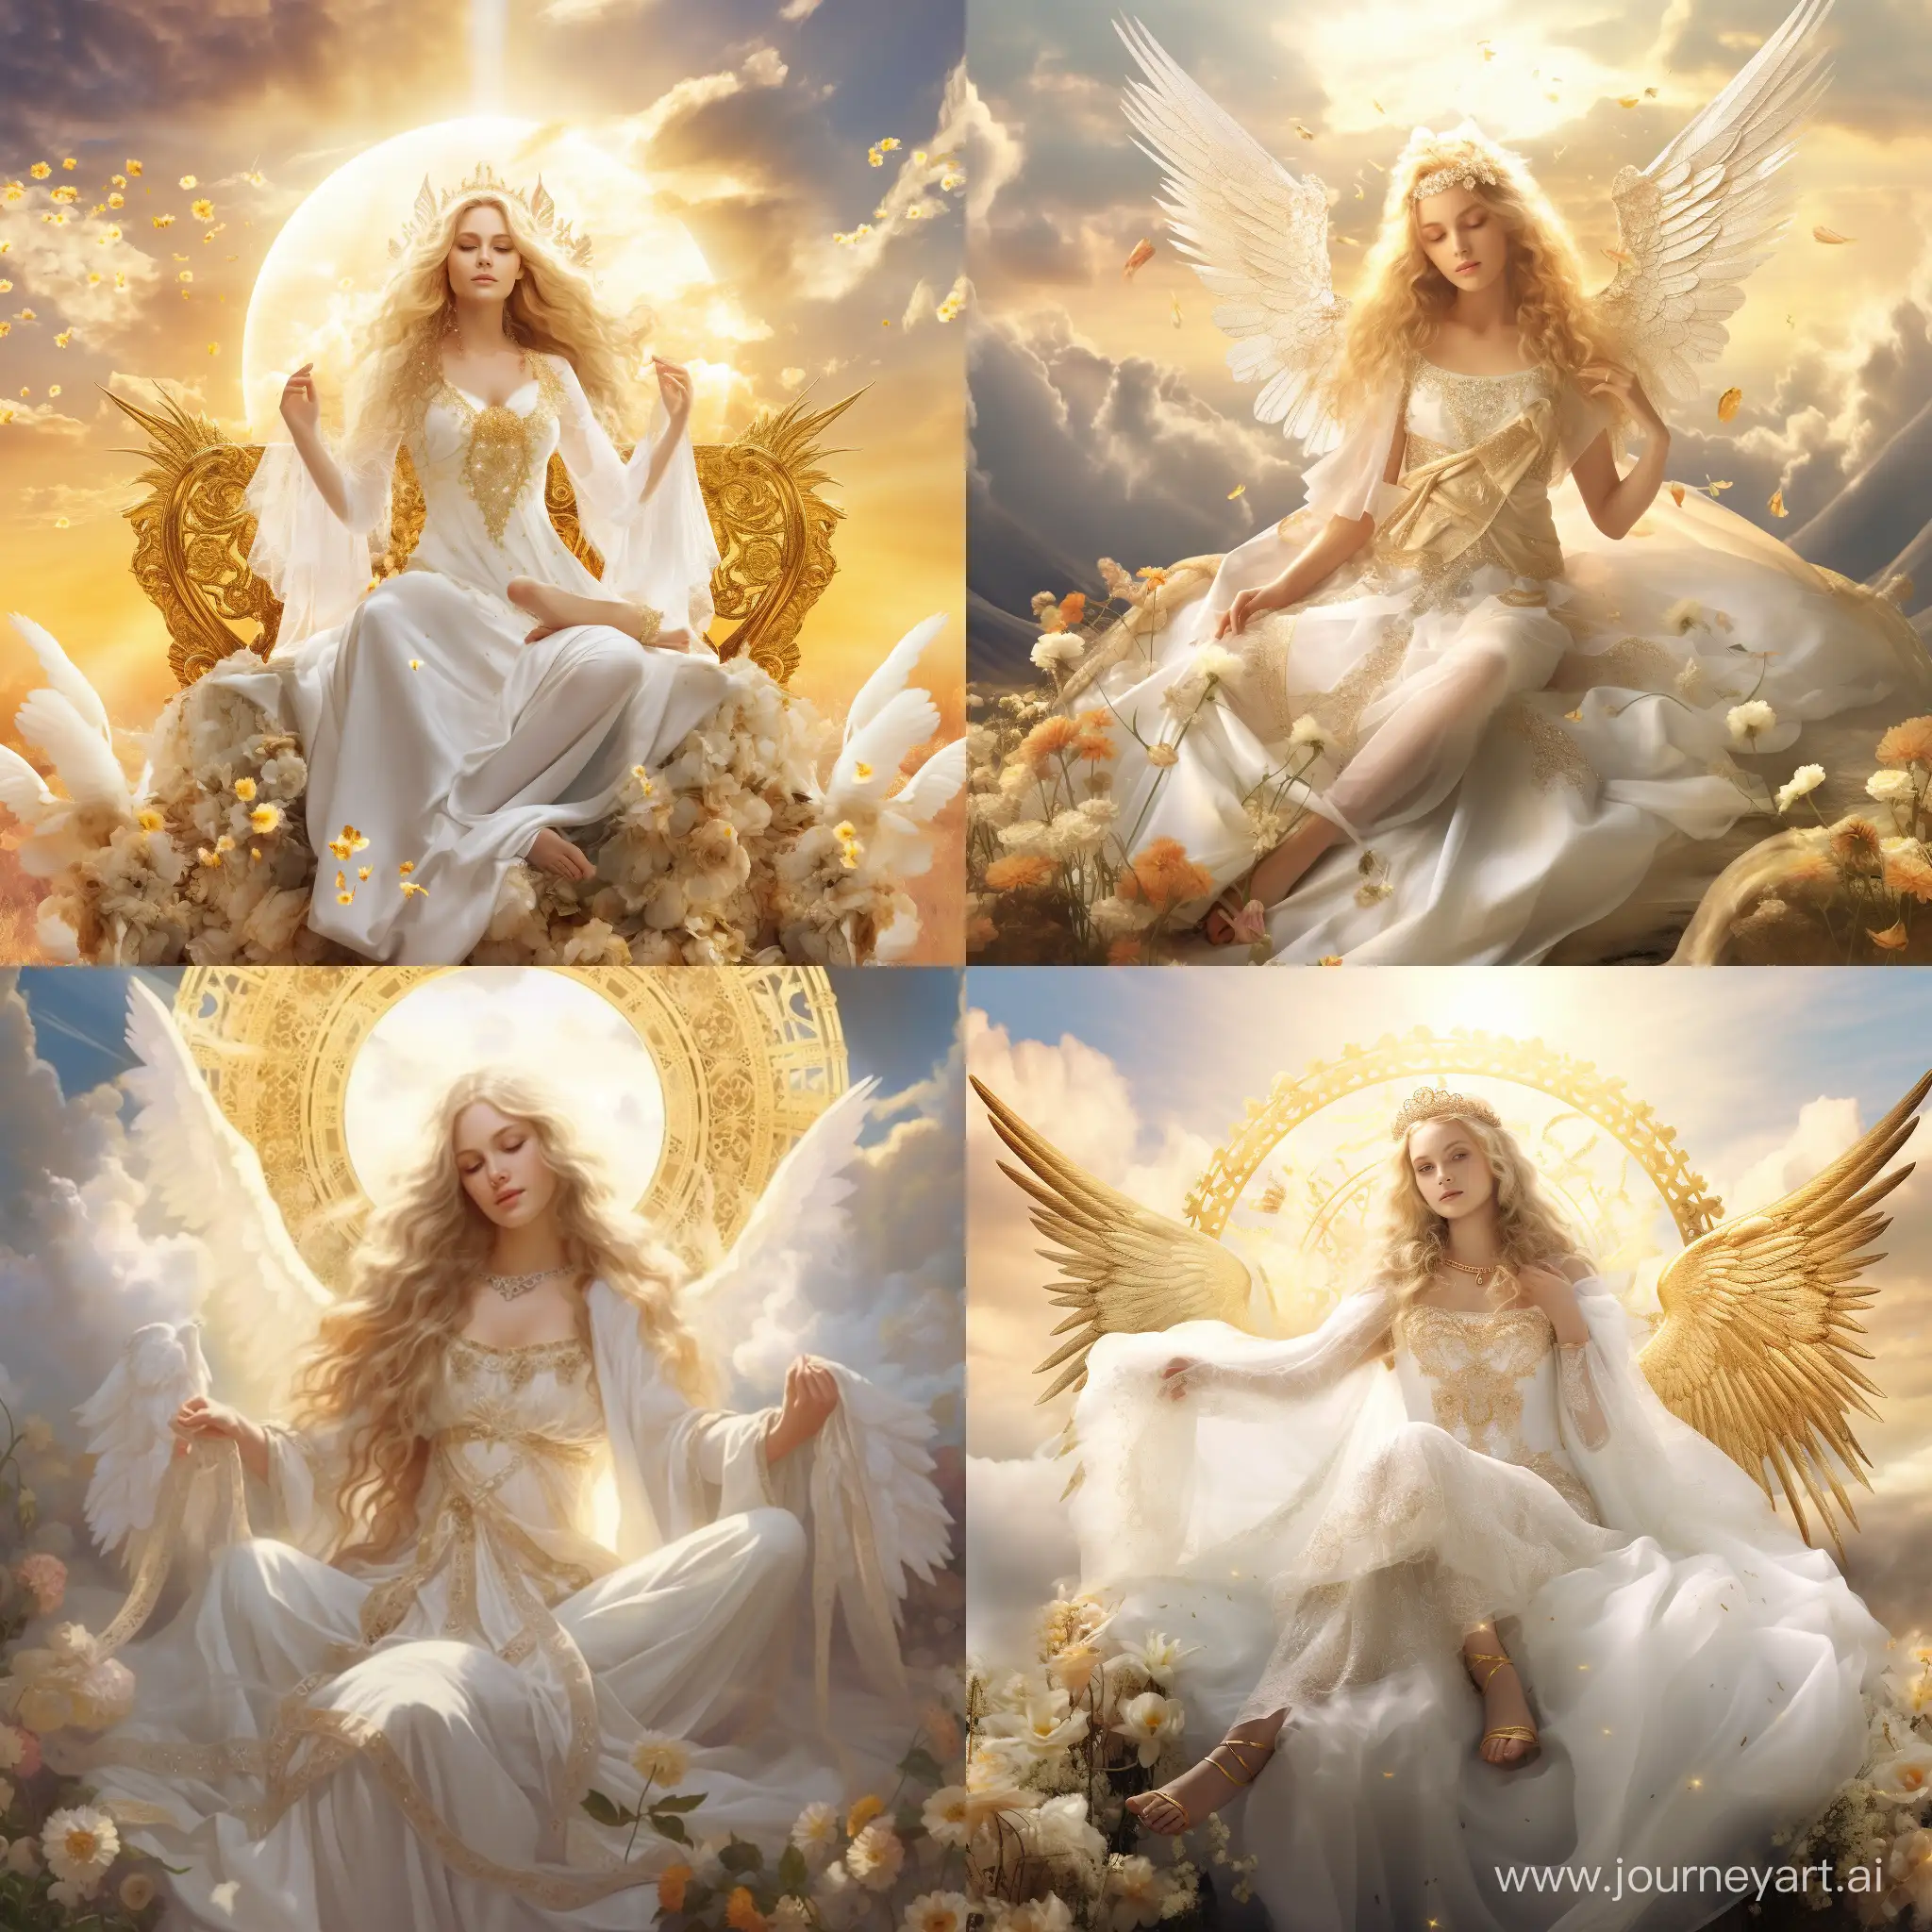 Transcendent-Maiden-with-Crystal-Veil-and-Angelic-Wings-on-Heavenly-Clouds